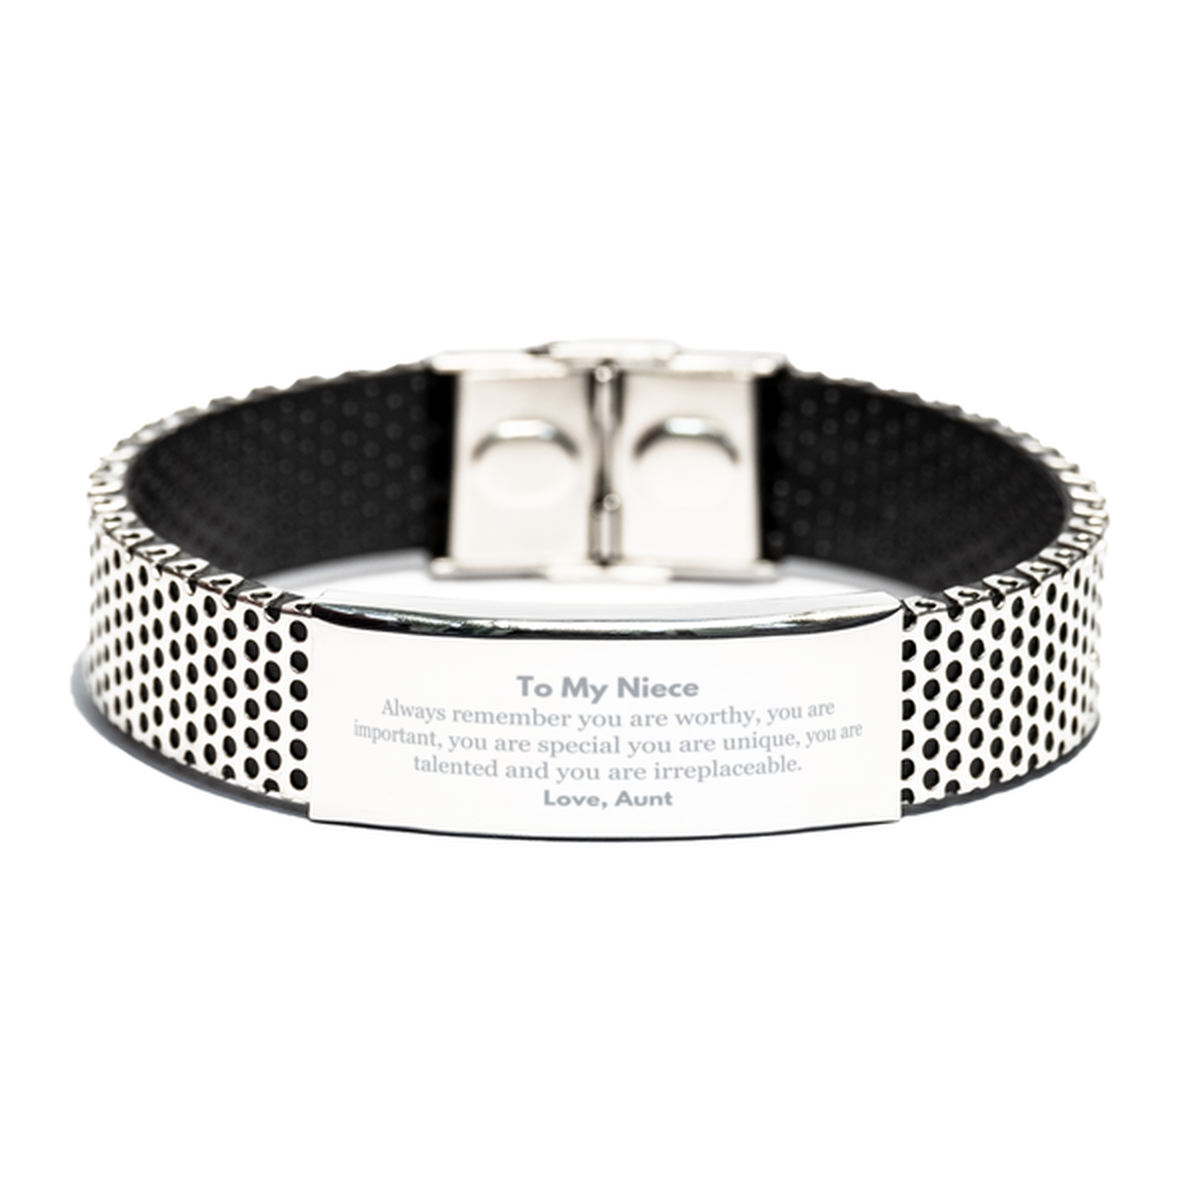 Niece Birthday Gifts from Aunt, Inspirational Stainless Steel Bracelet for Niece Christmas Graduation Gifts for Niece Always remember you are worthy, you are important. Love, Aunt